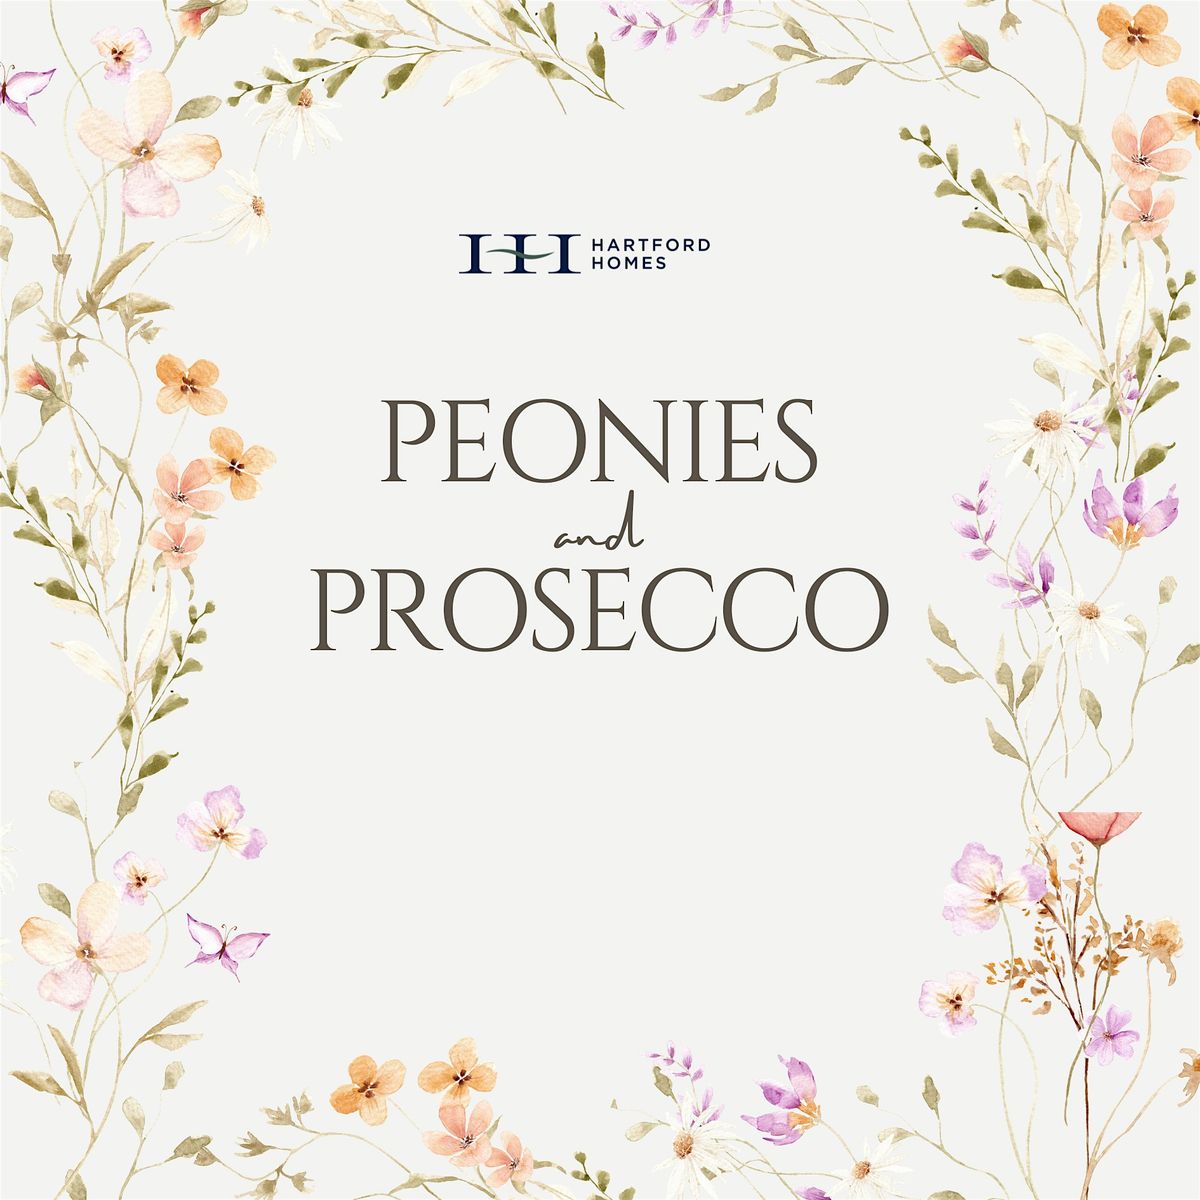 Peonies and Prosecco